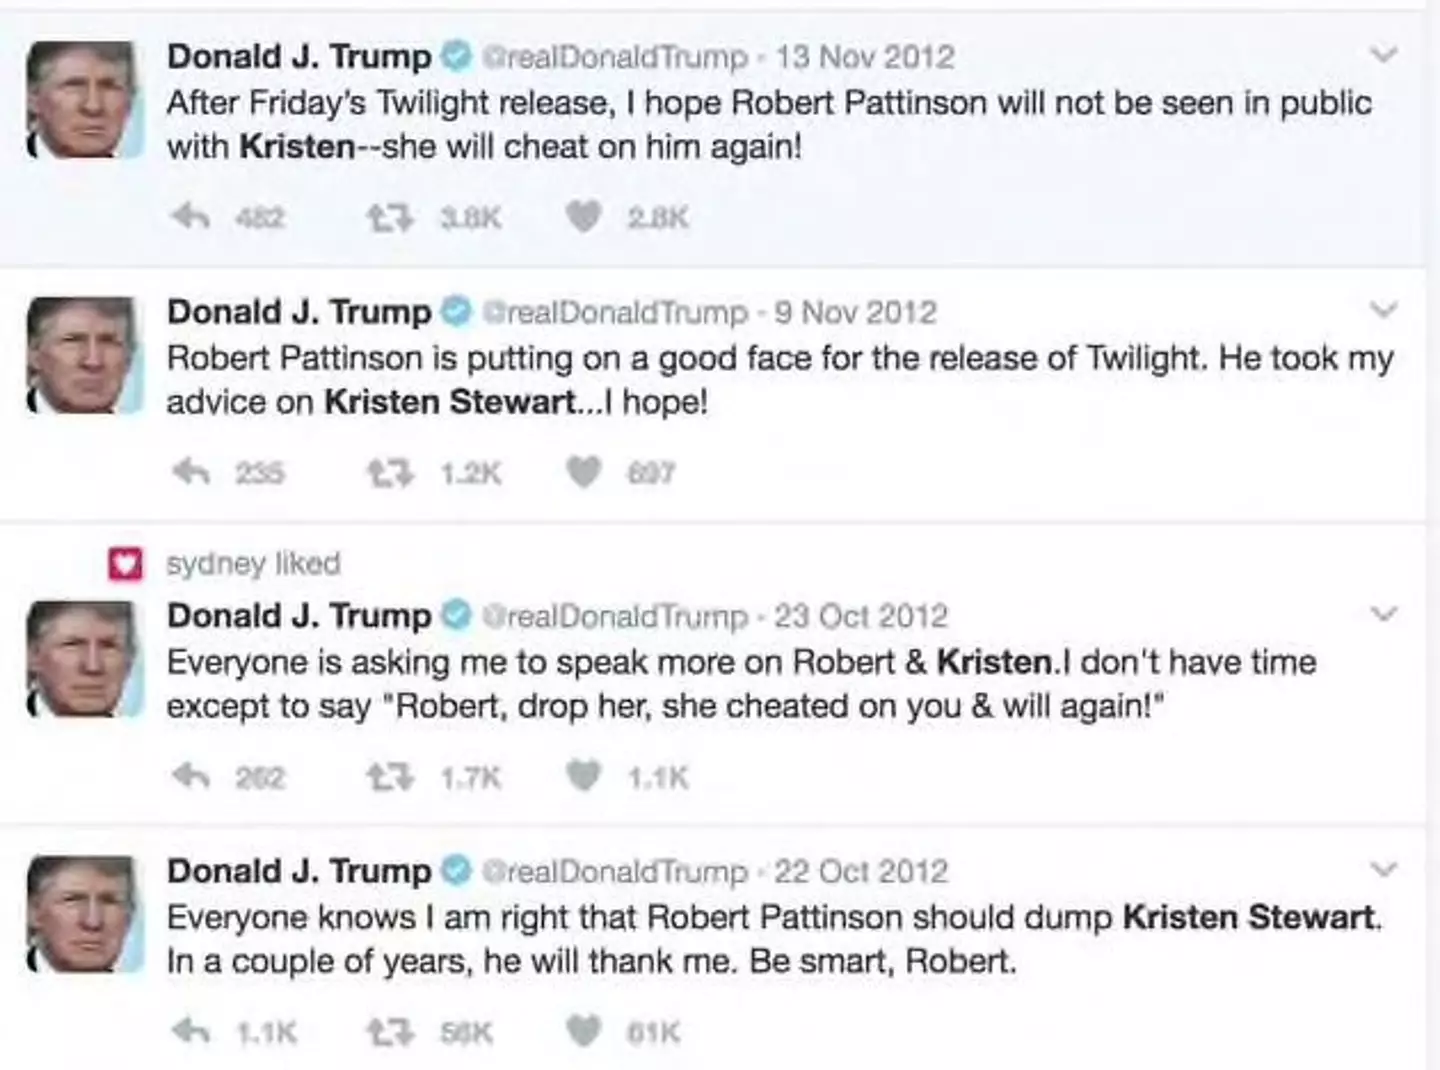 For some reason Trump was really into Kristen Stewart and Robert Pattinson's relationship.